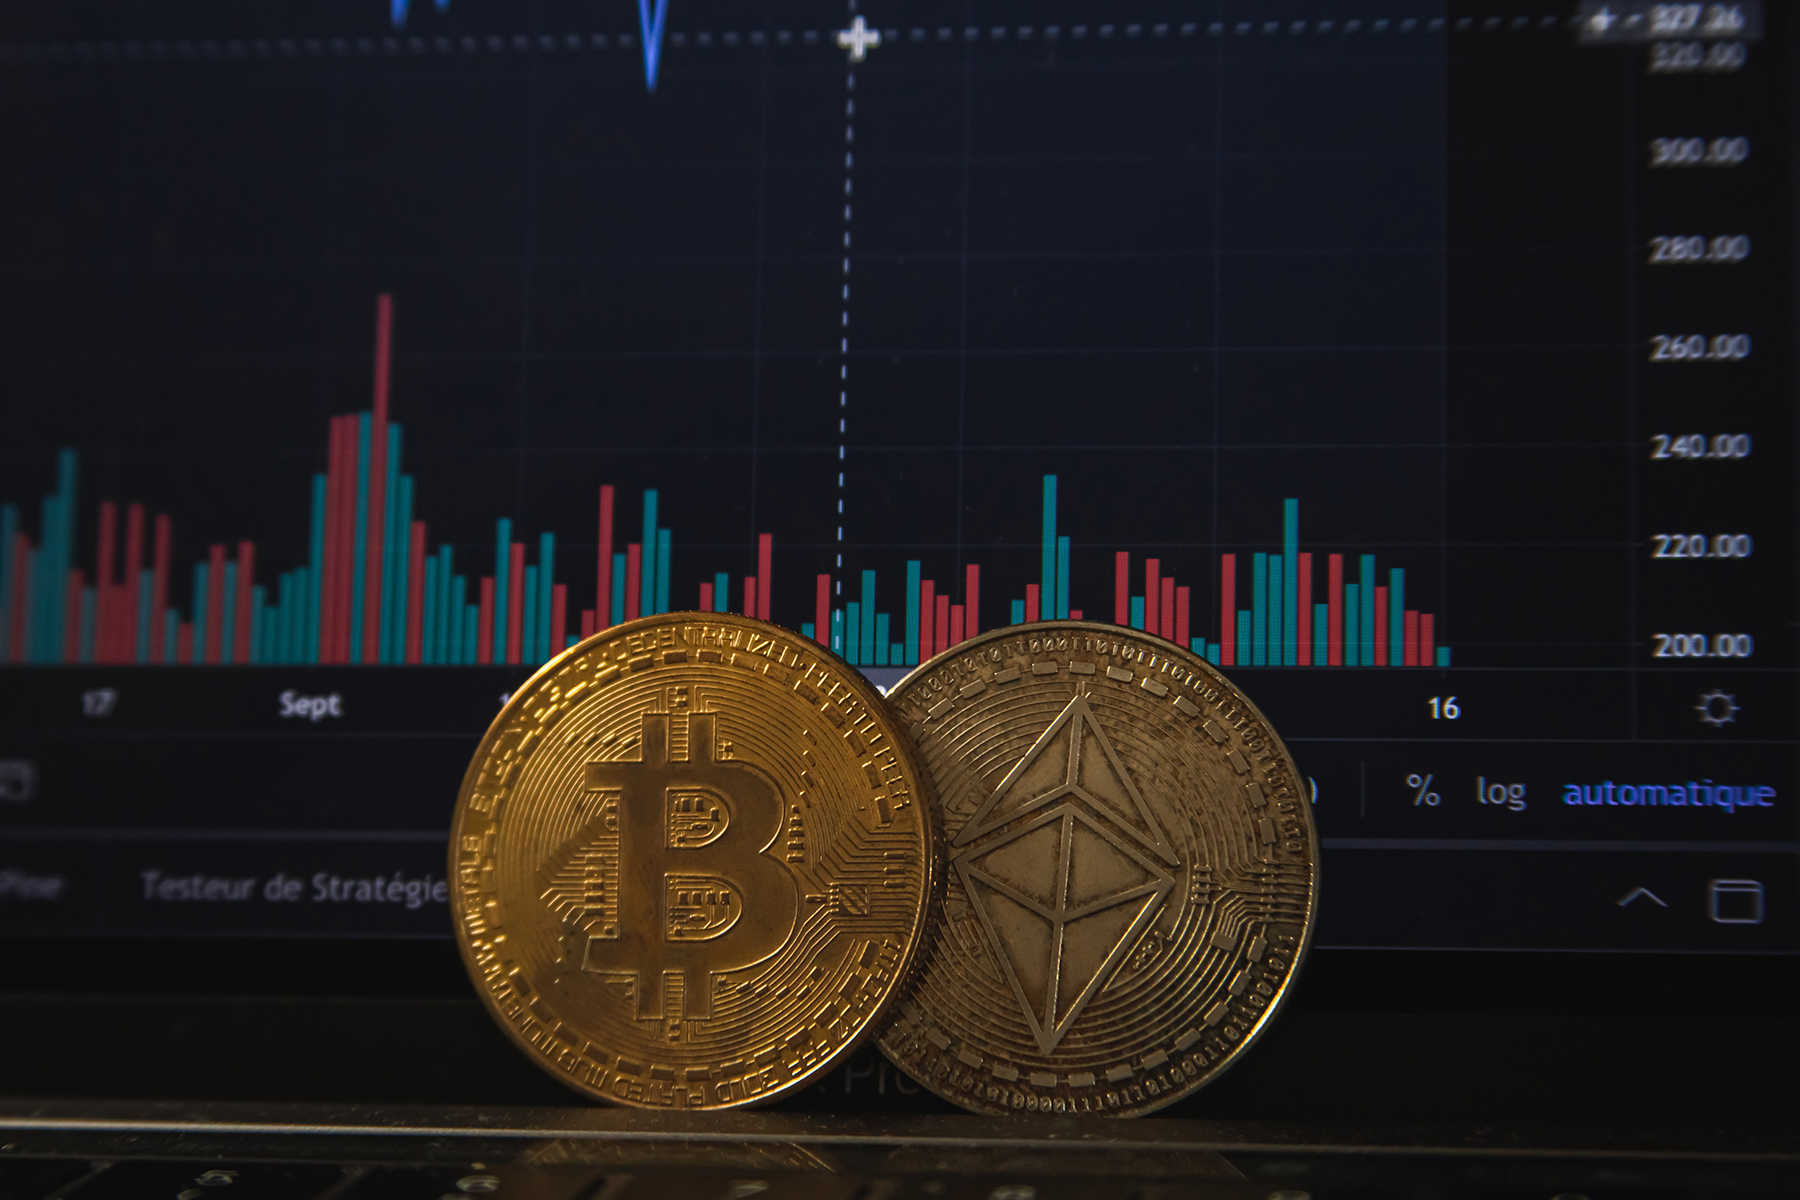 Two cryptocurrency coins in front of a computer screen with red and blue charts